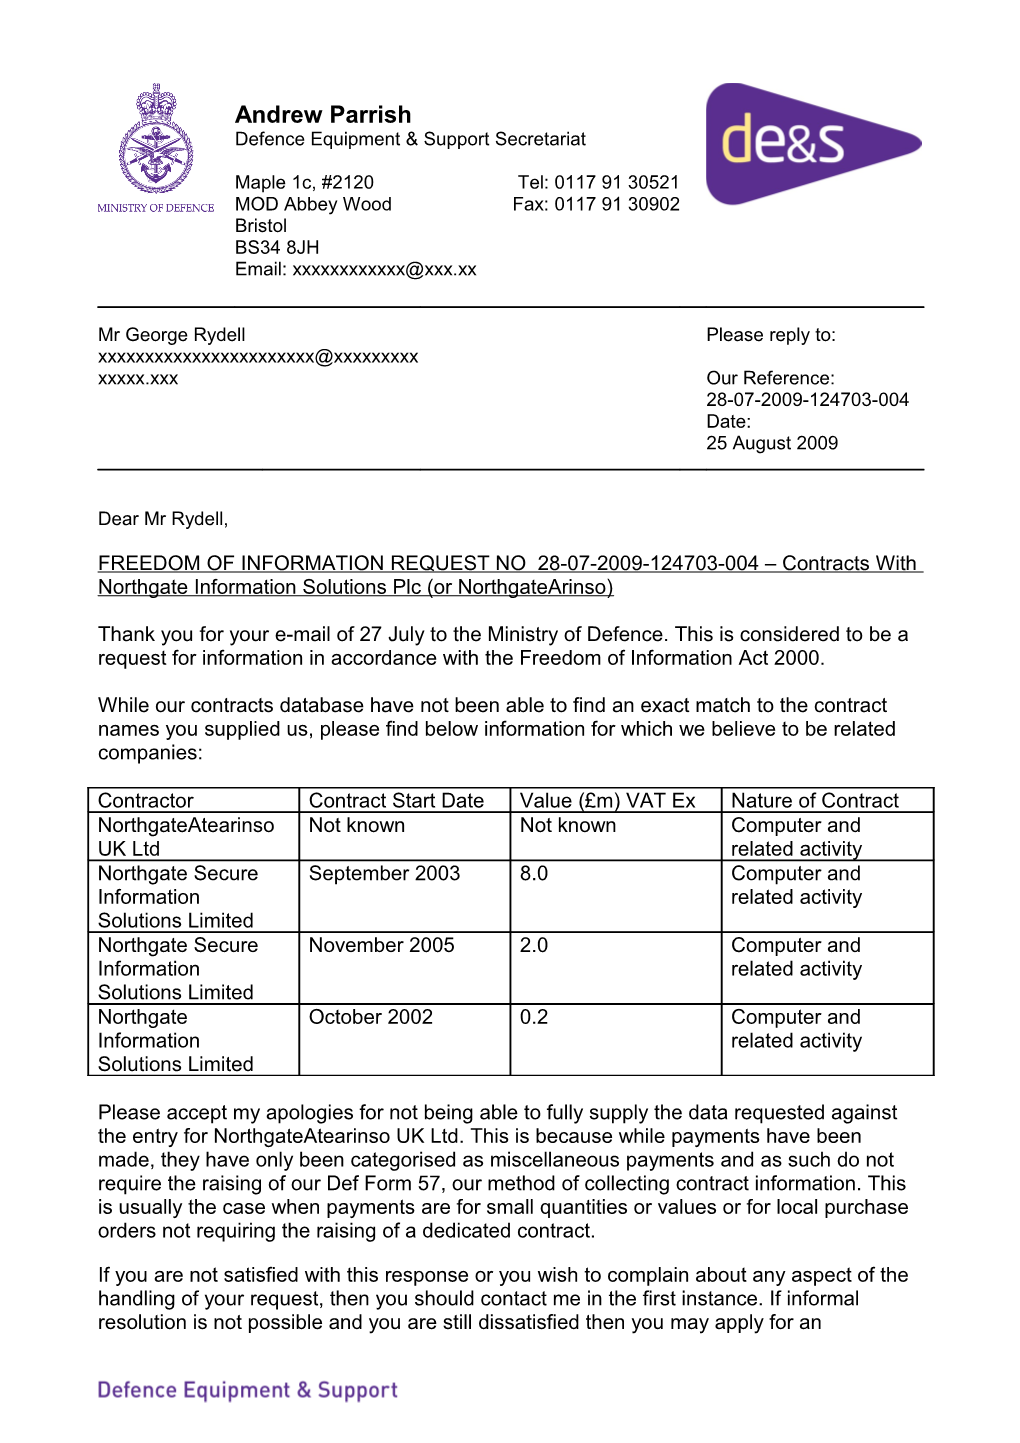 FREEDOM of INFORMATION REQUEST NO 28-07-2009-124703-004 Contracts with Northgate Information